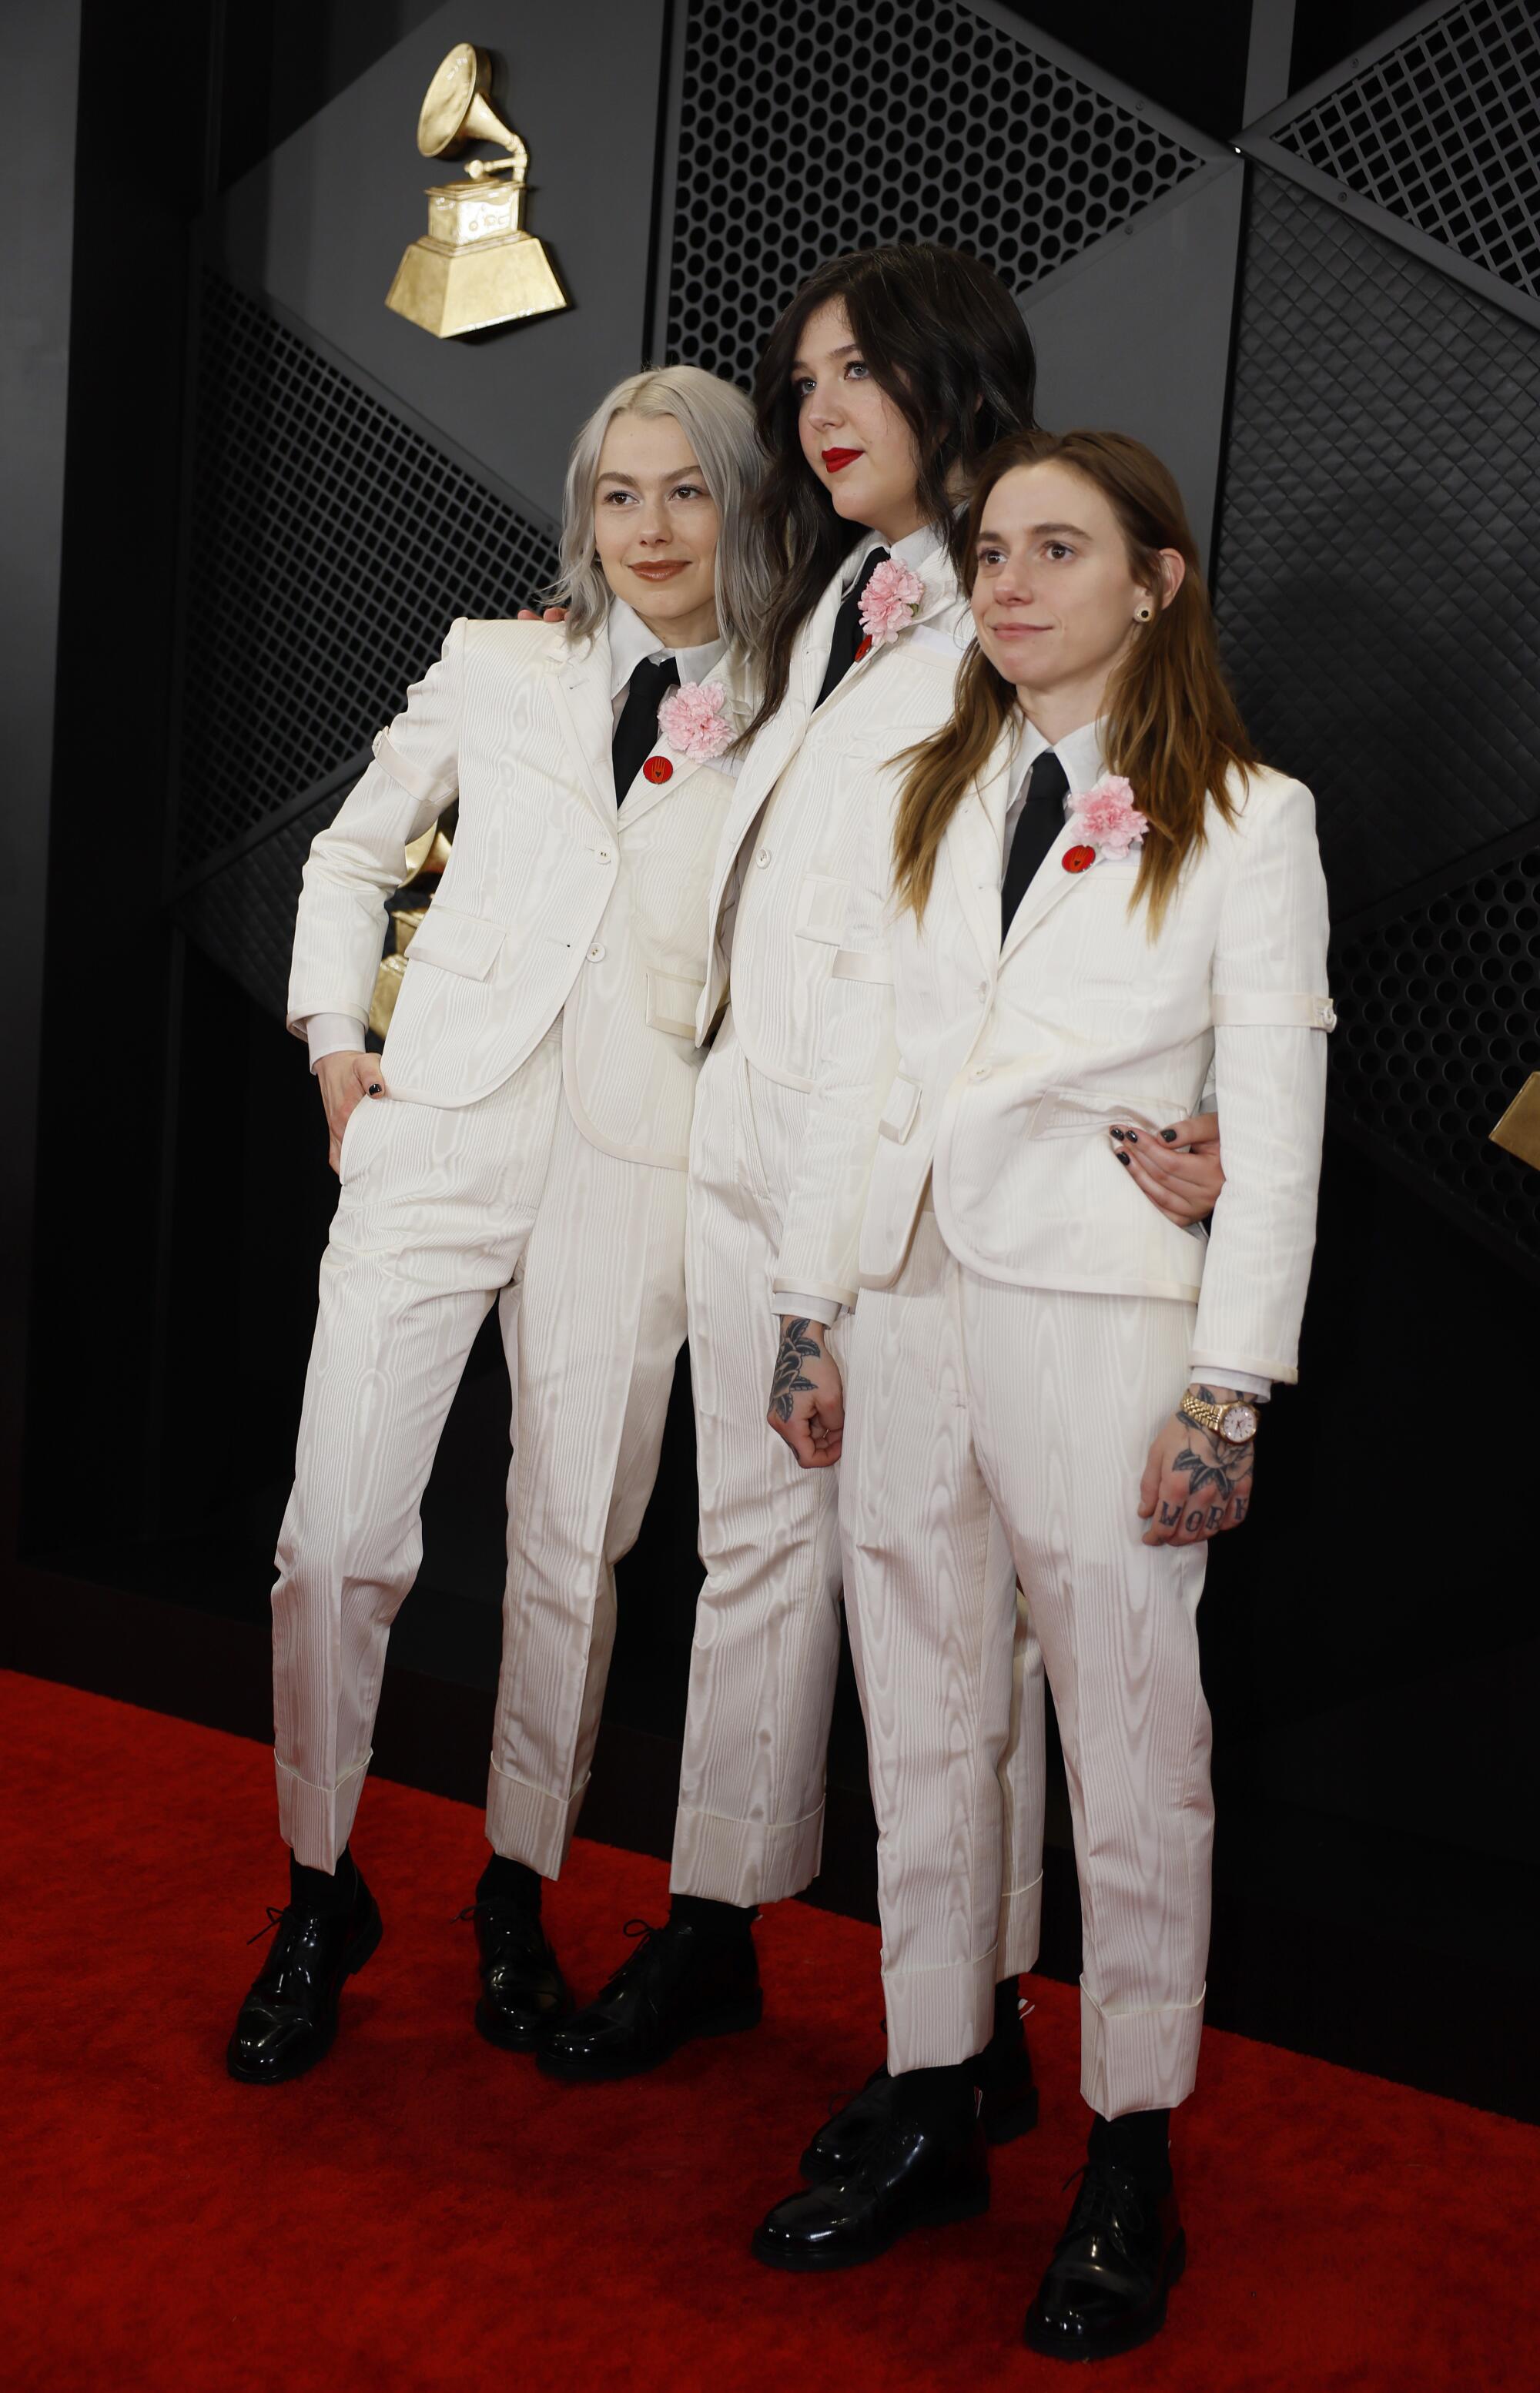 Three women in white suits with black ties